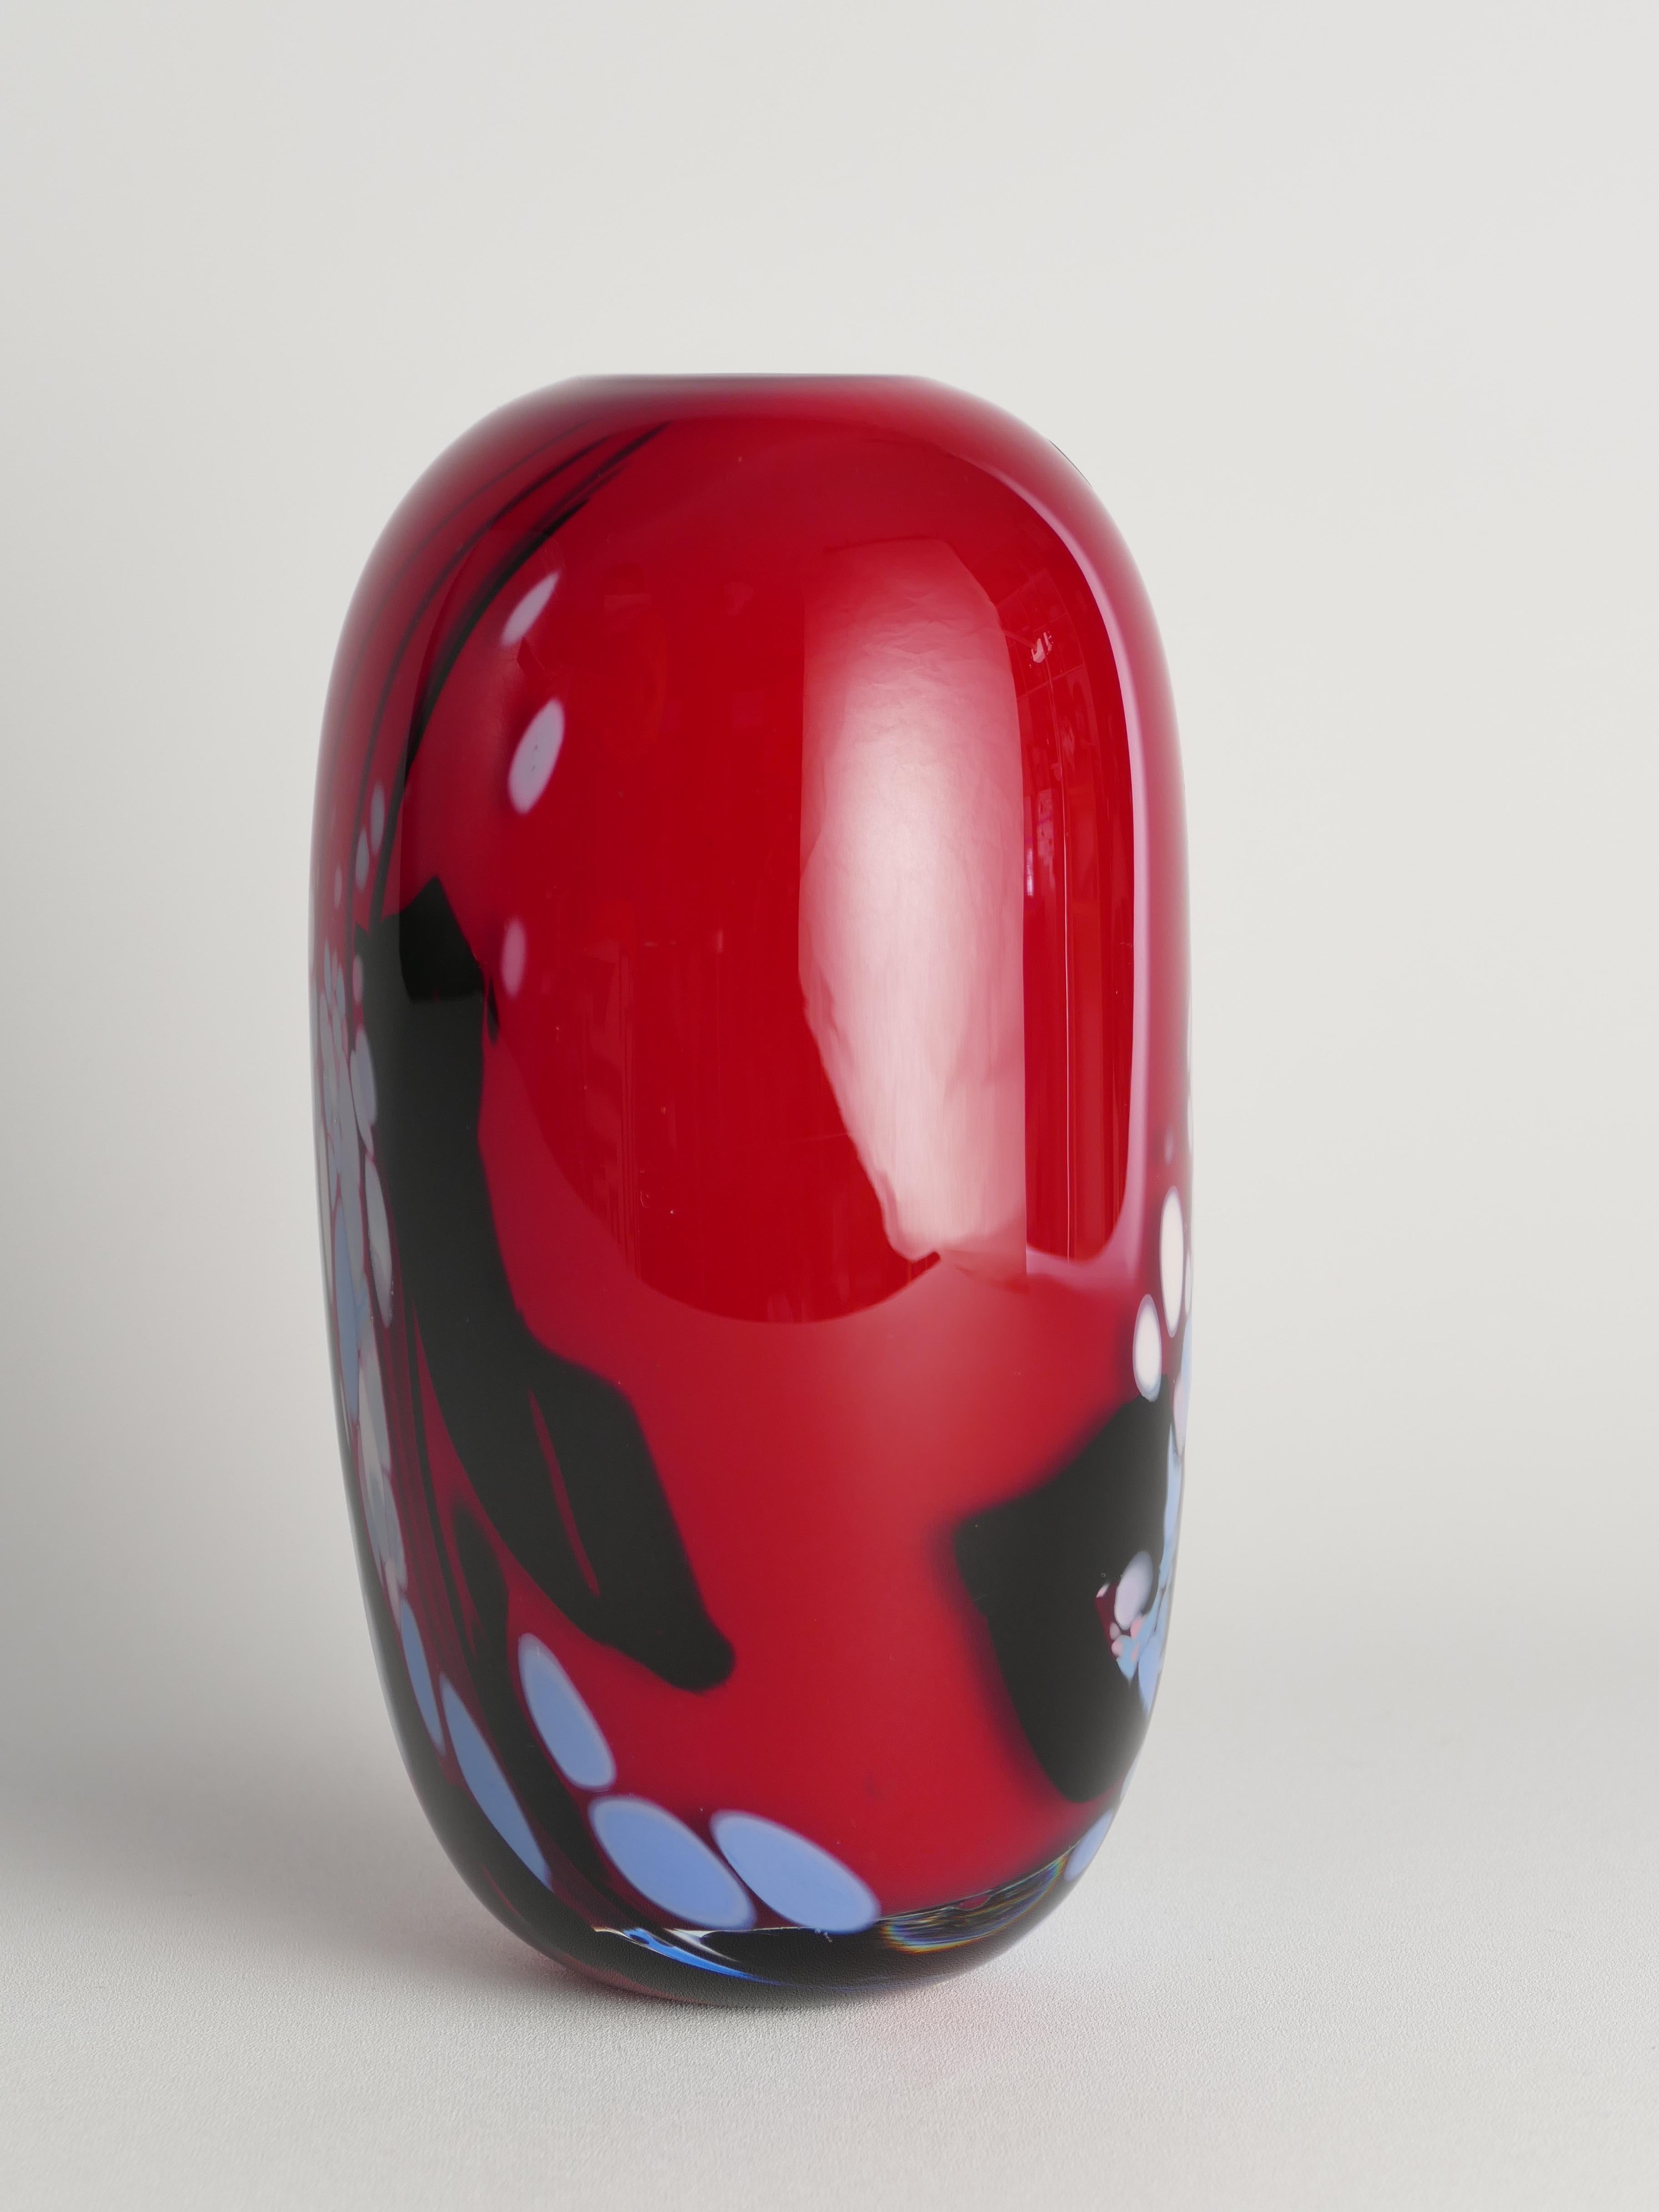 Unique Cherry Red Art Glass Vase by Mikael Axenbrant, Sweden 1990 For Sale 4